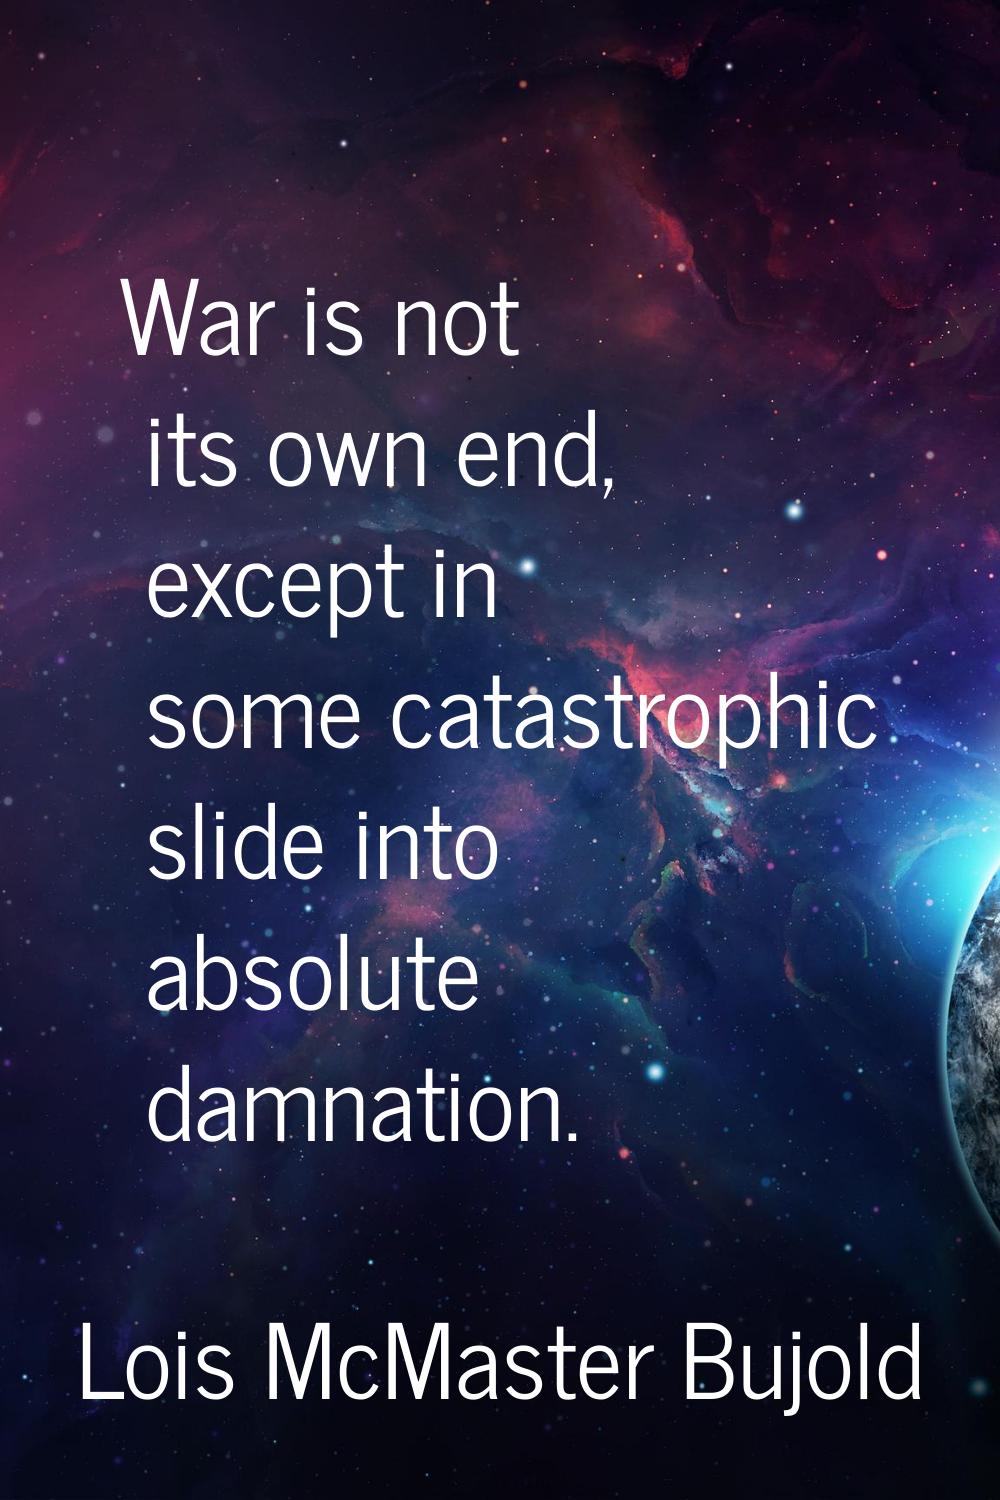 War is not its own end, except in some catastrophic slide into absolute damnation.